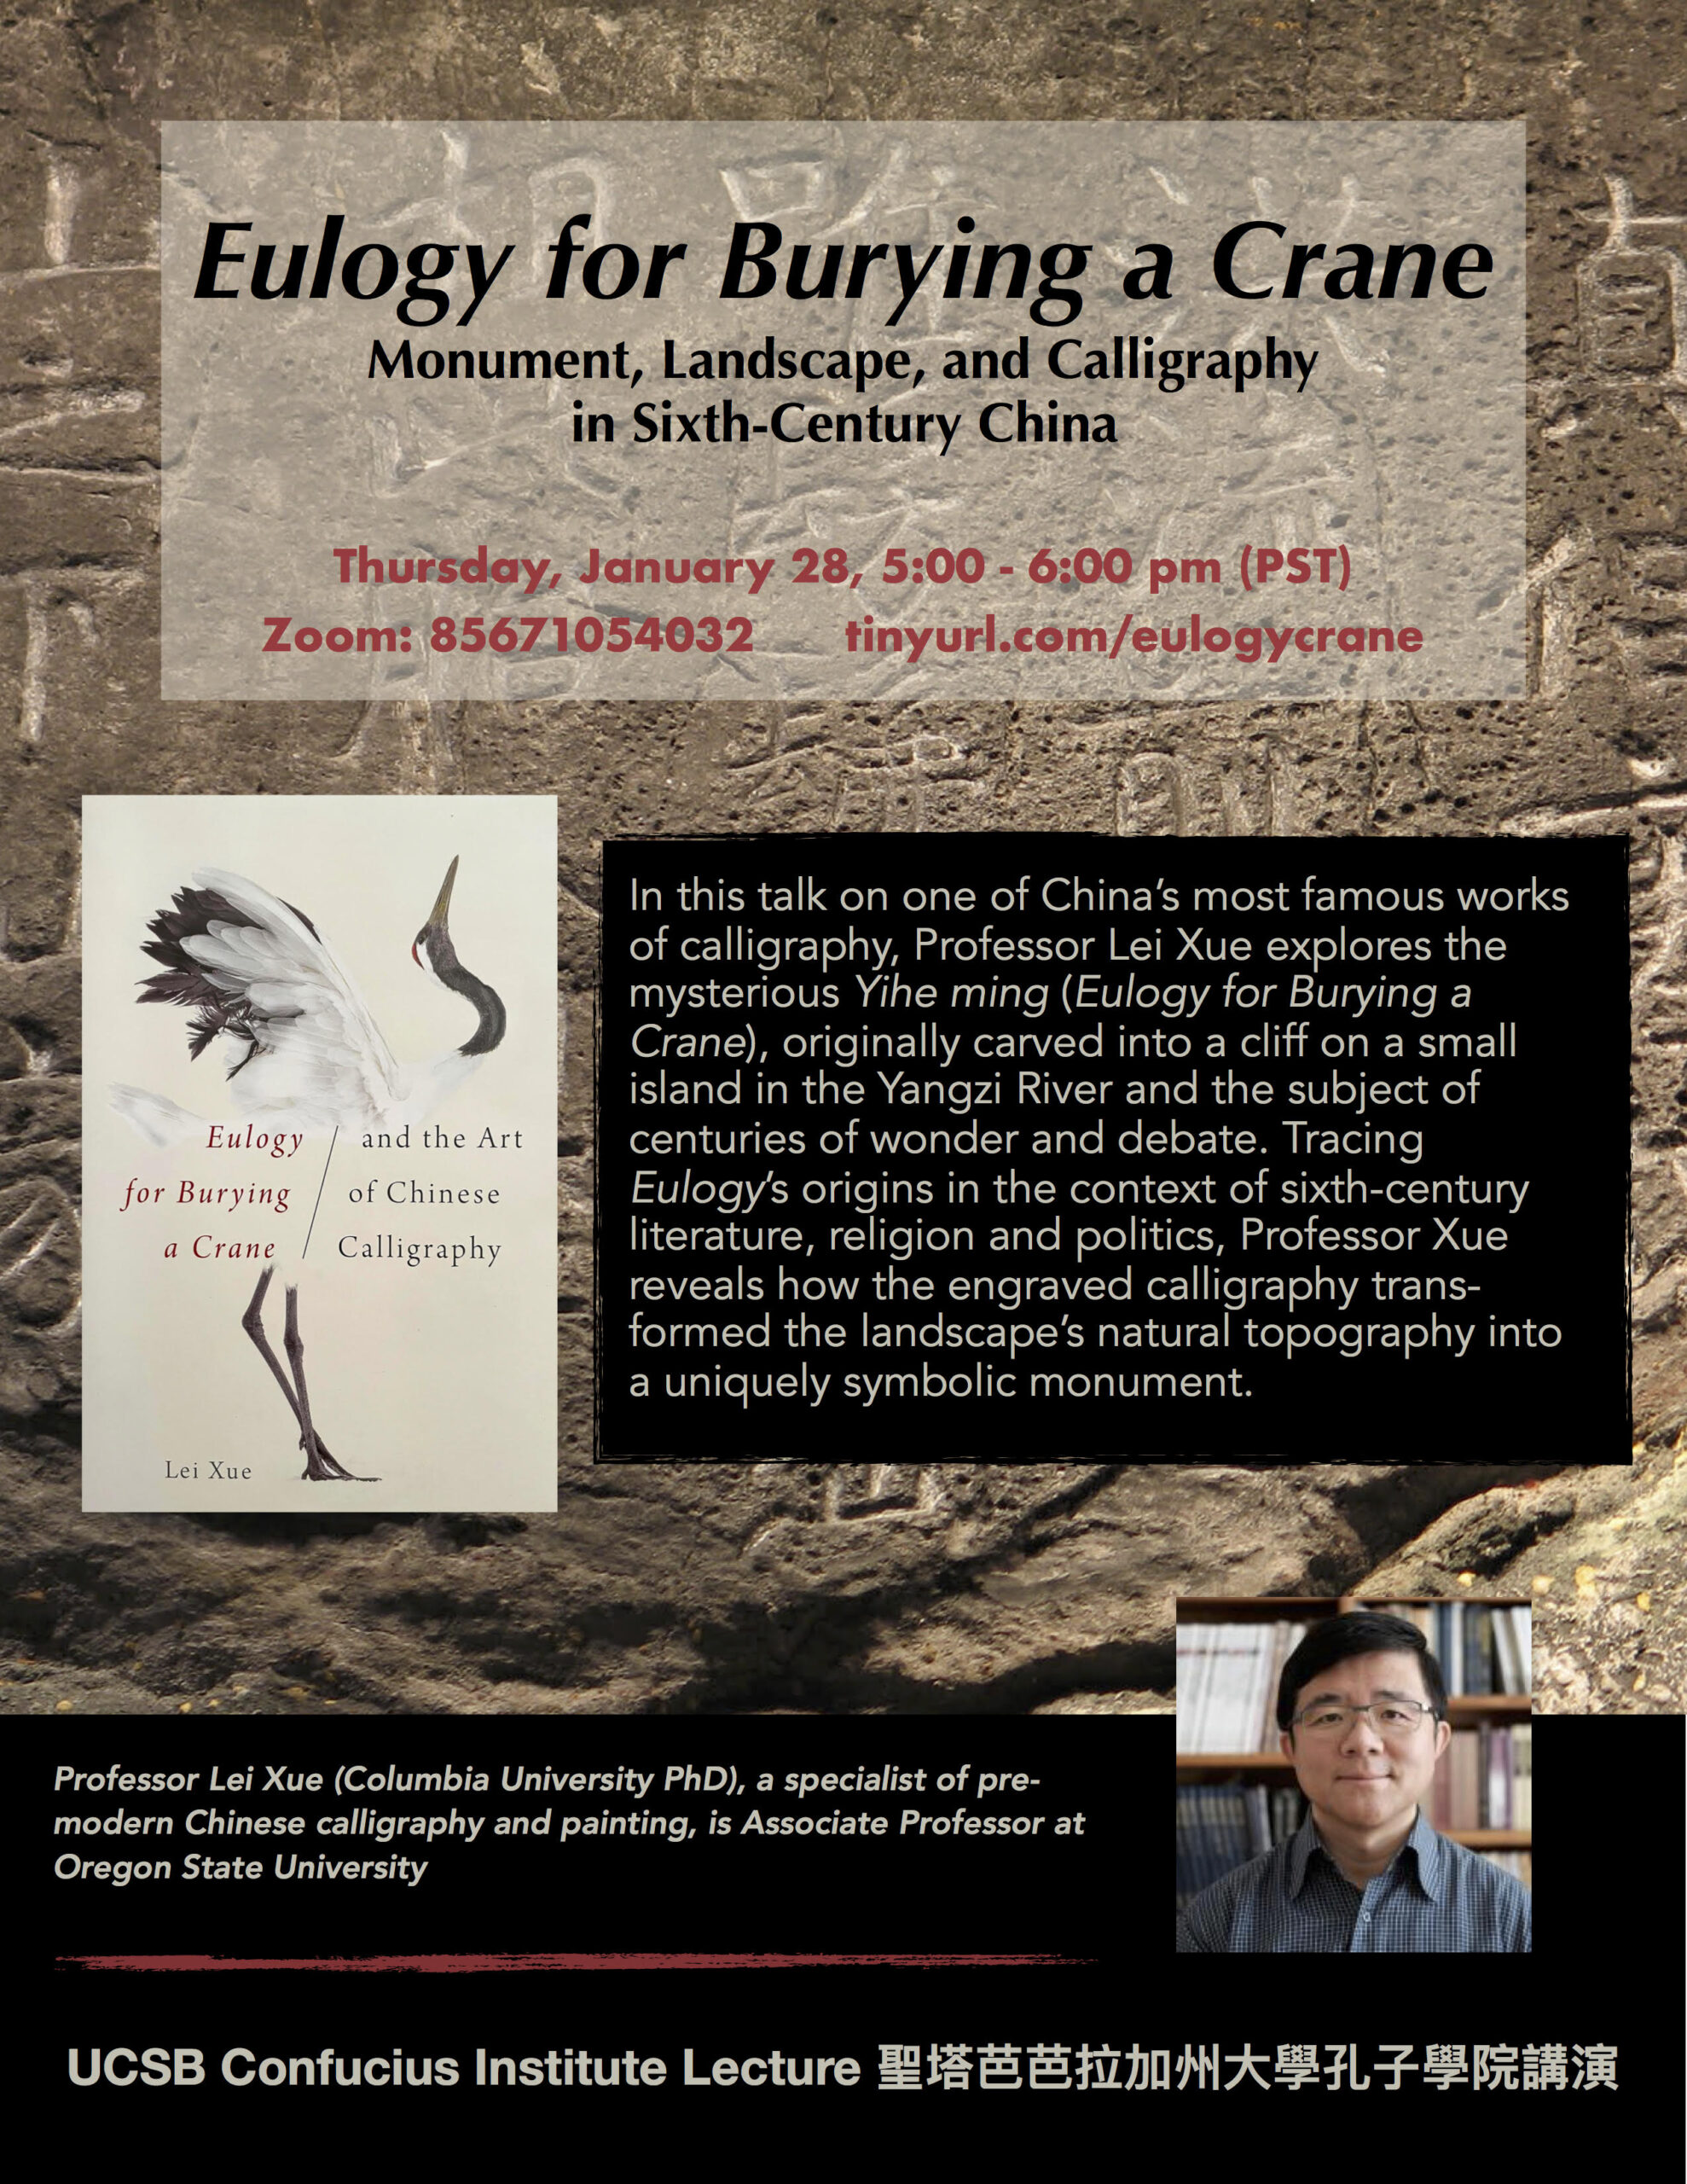 Flyer for "Eulogy for Burying a Crane: Monument, Landscape, and Calligraphy in Sixth Century China" featuring Professor Lei Xue on 1/28 from 5-6PM